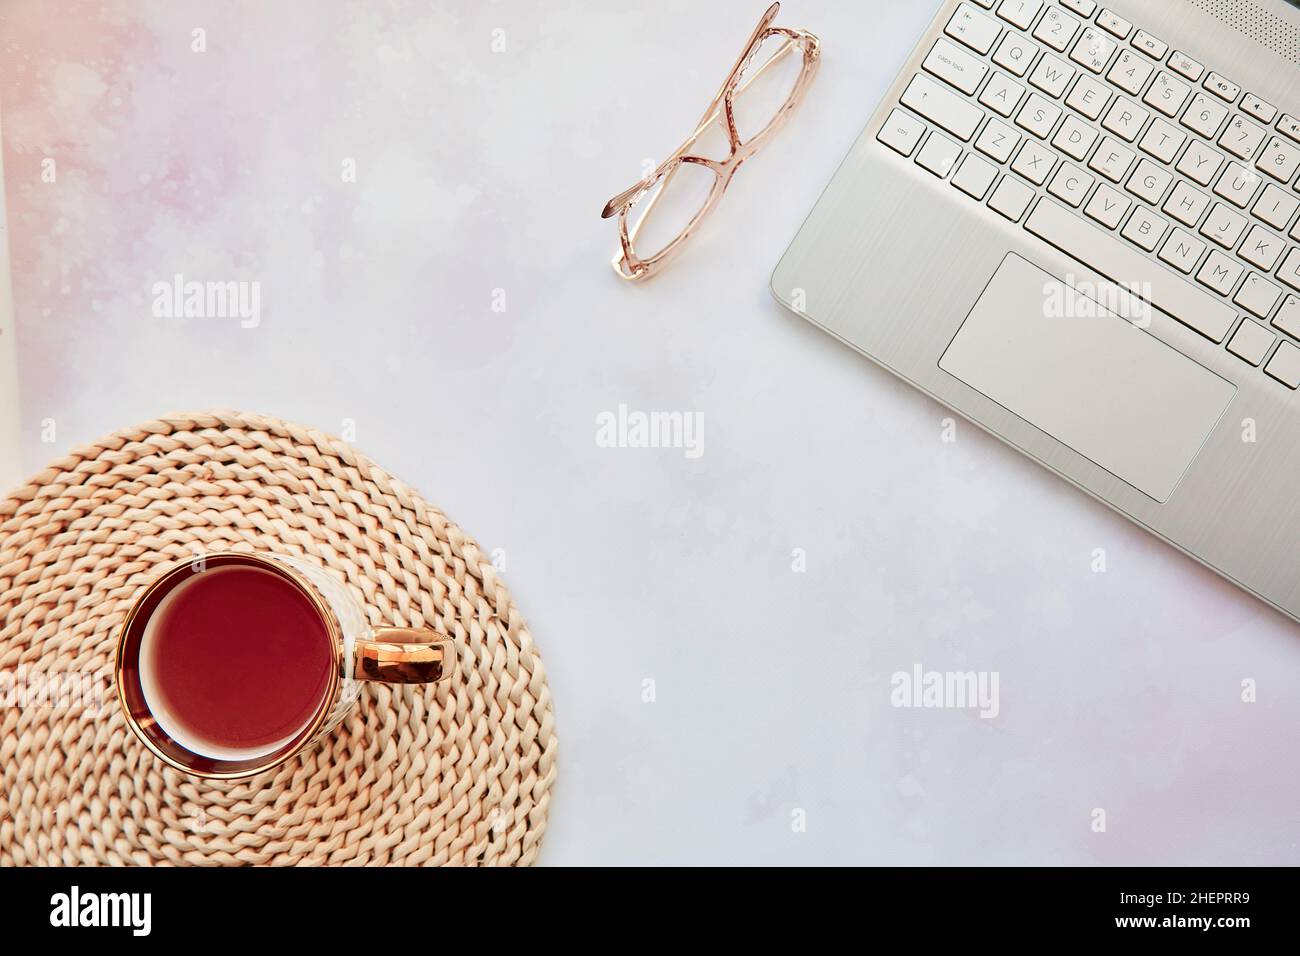 Aesthetic home office: laptop, tea cup and glasses. Feminine concept, remote work, freelance, taking webinar, video calling family because of quarantine concept. Copy space, view from above. Stock Photo